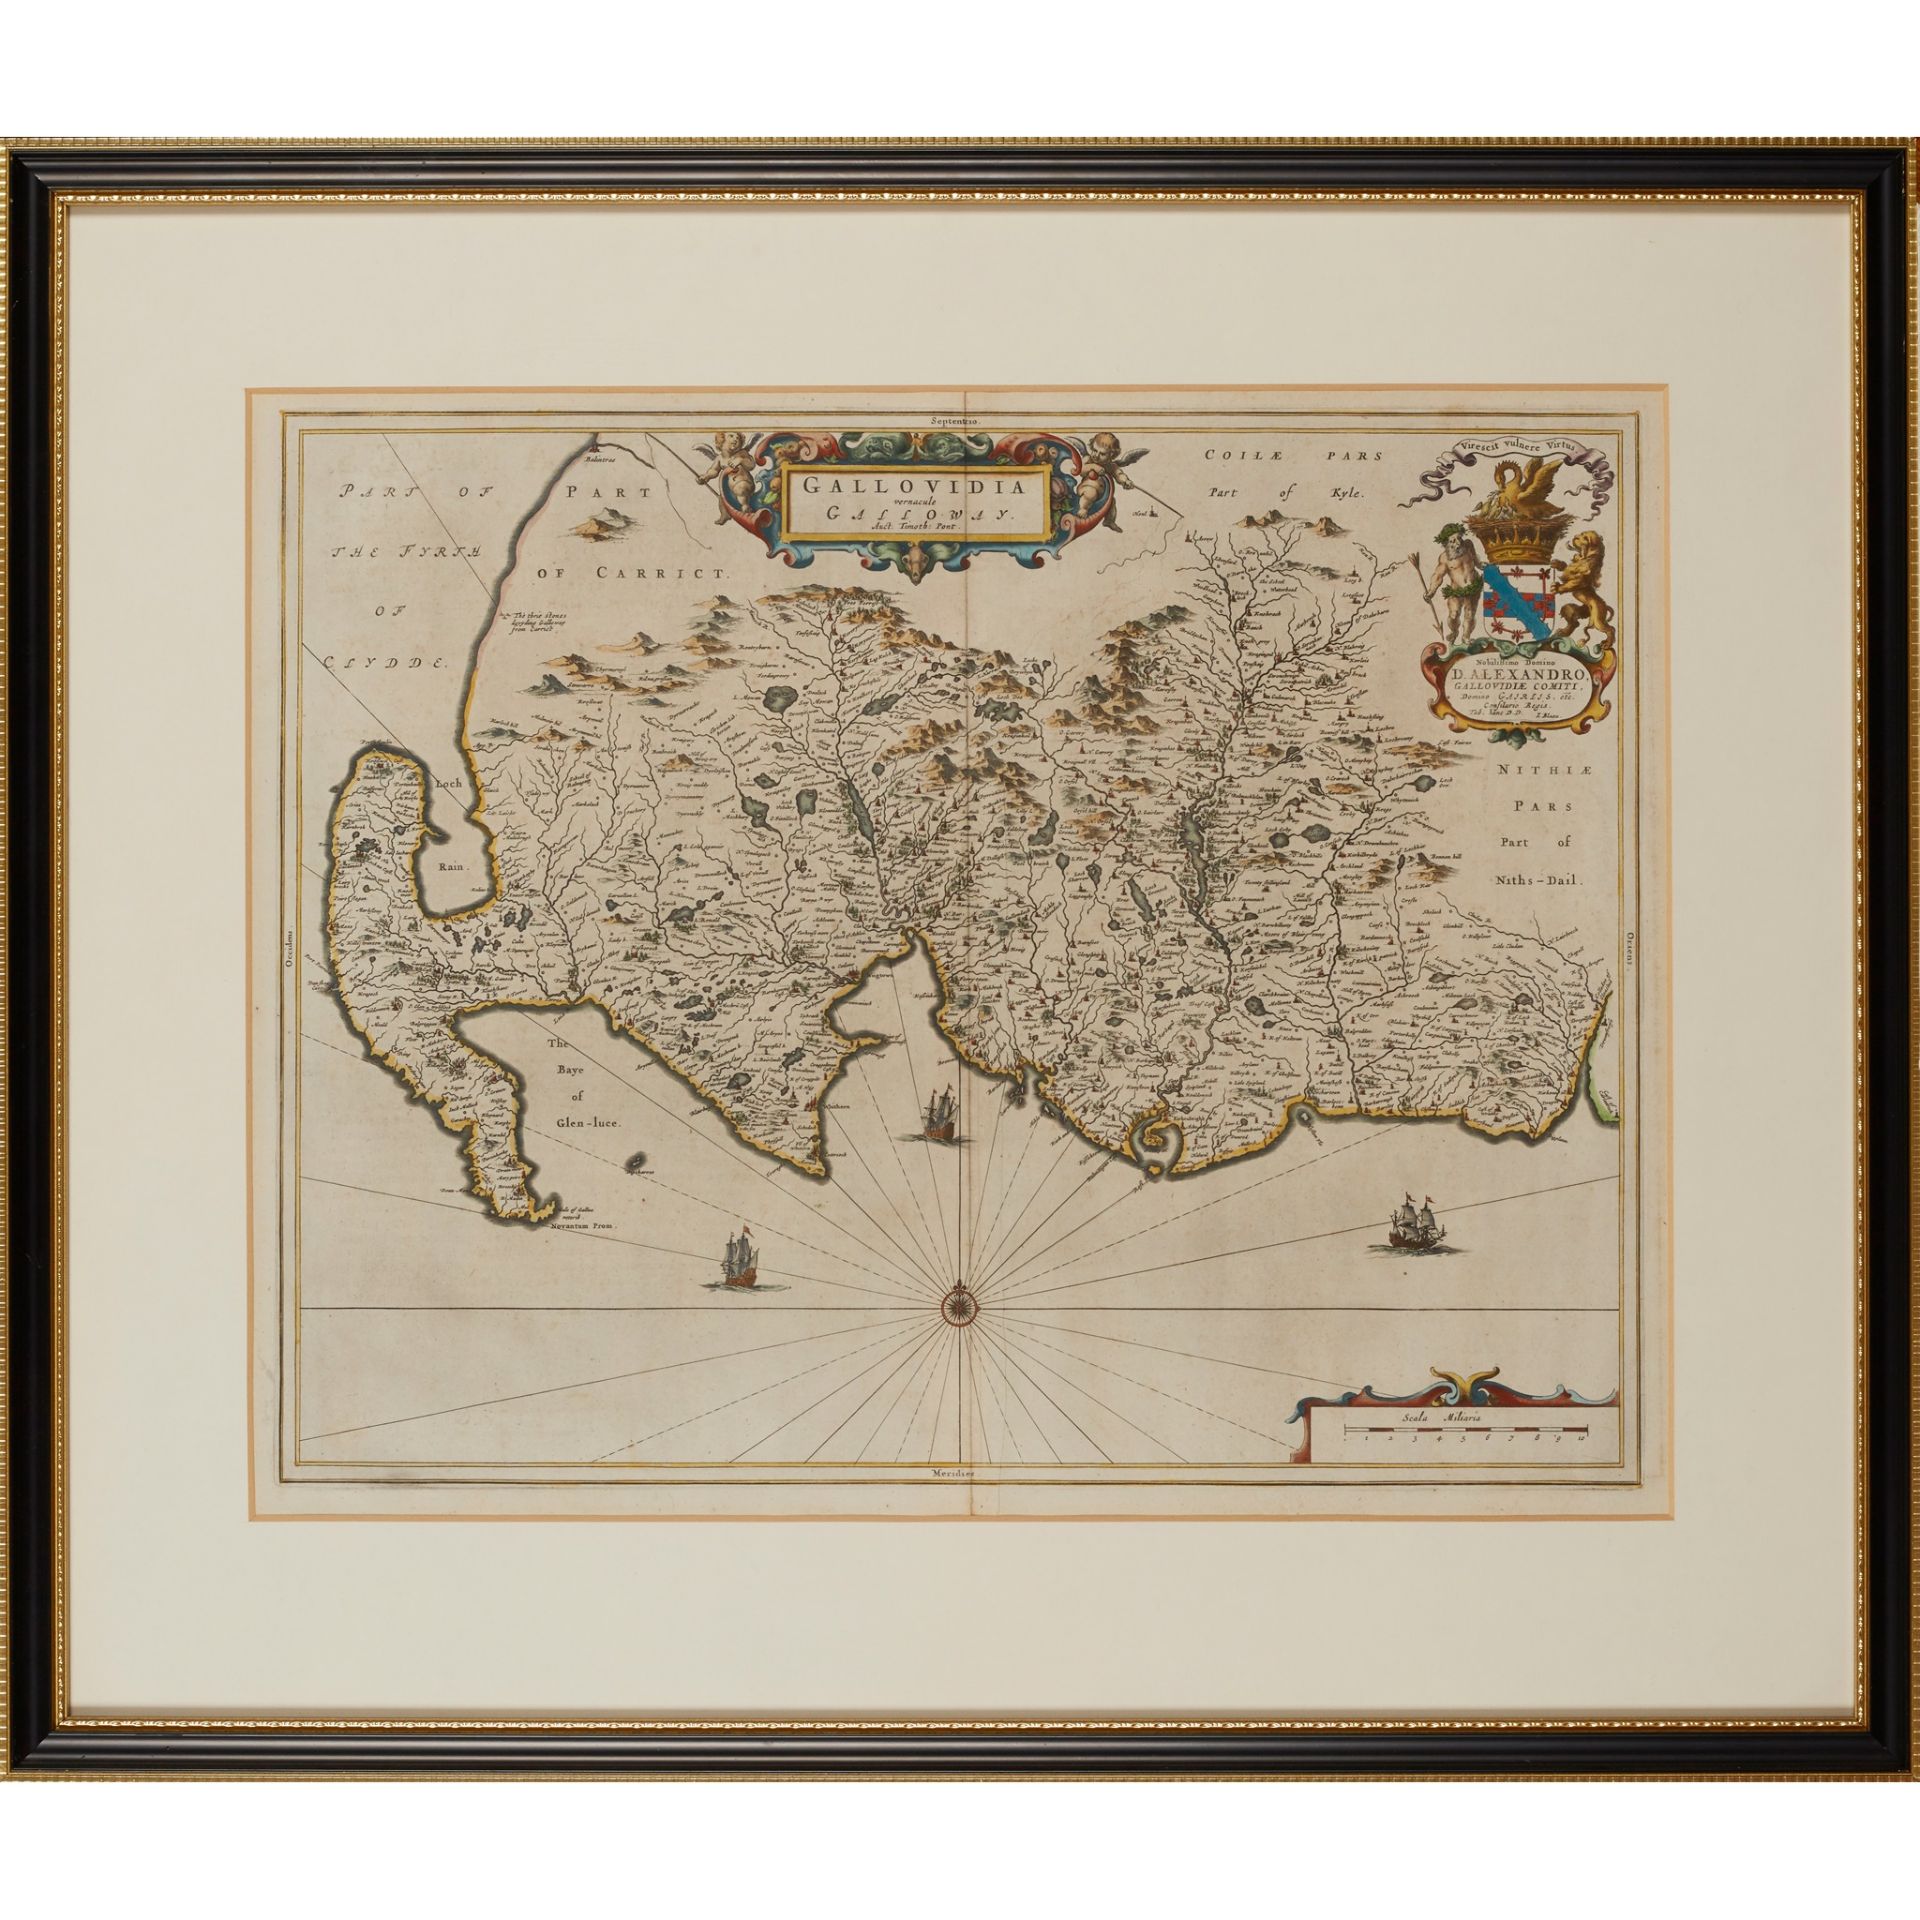 Blaeu, Jan A collection of maps